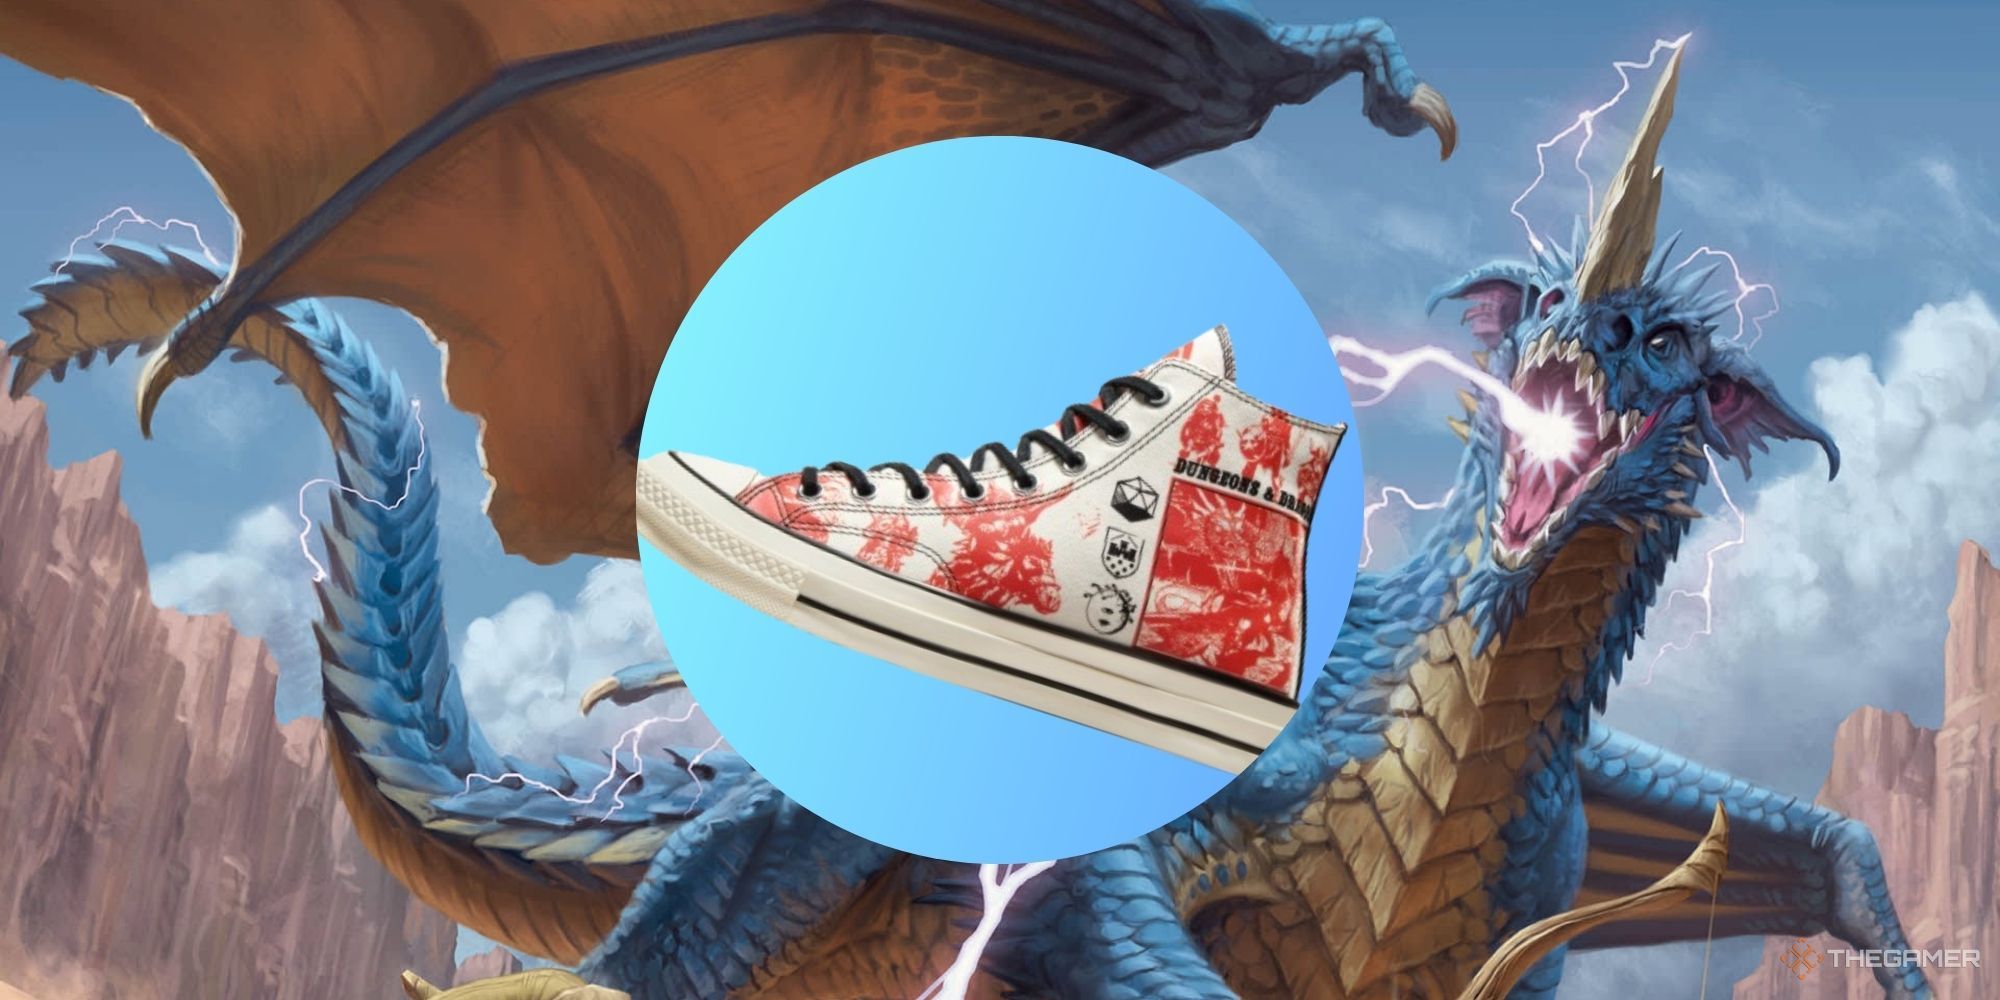 dungeons and dragons chuck 70 converse with a dragon in the background